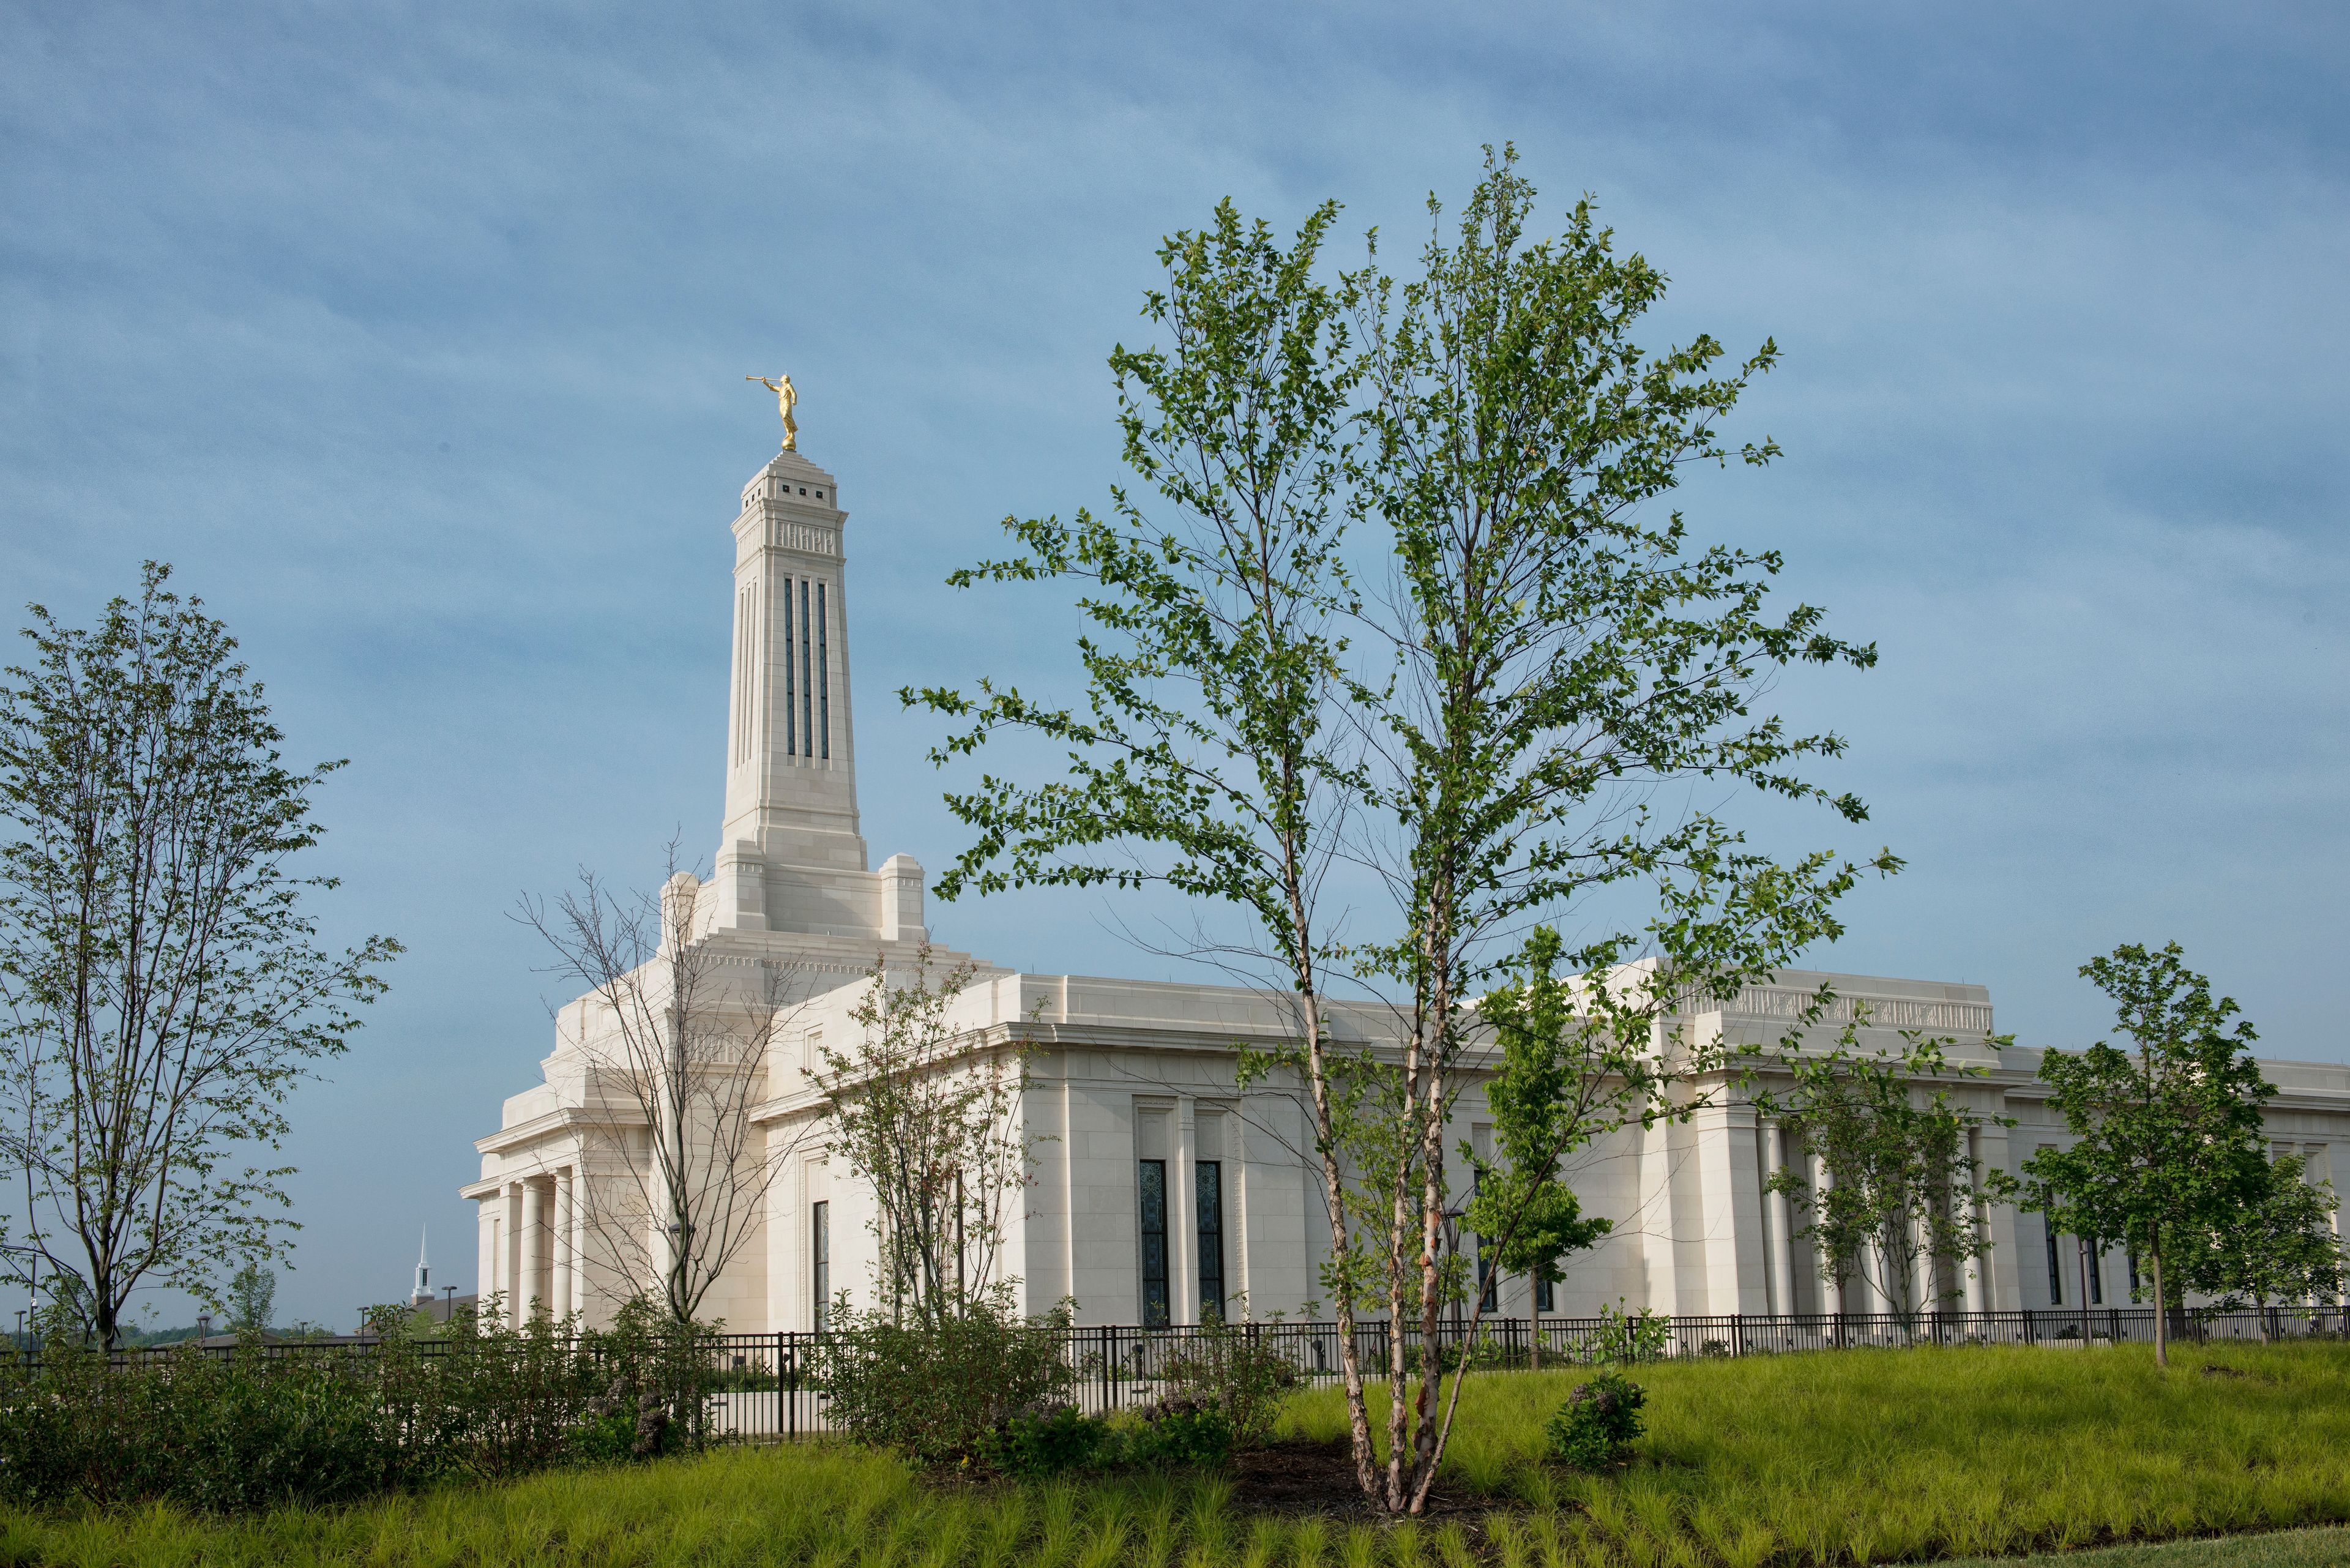 A side view of the Indianapolis Indiana Temple during the day.